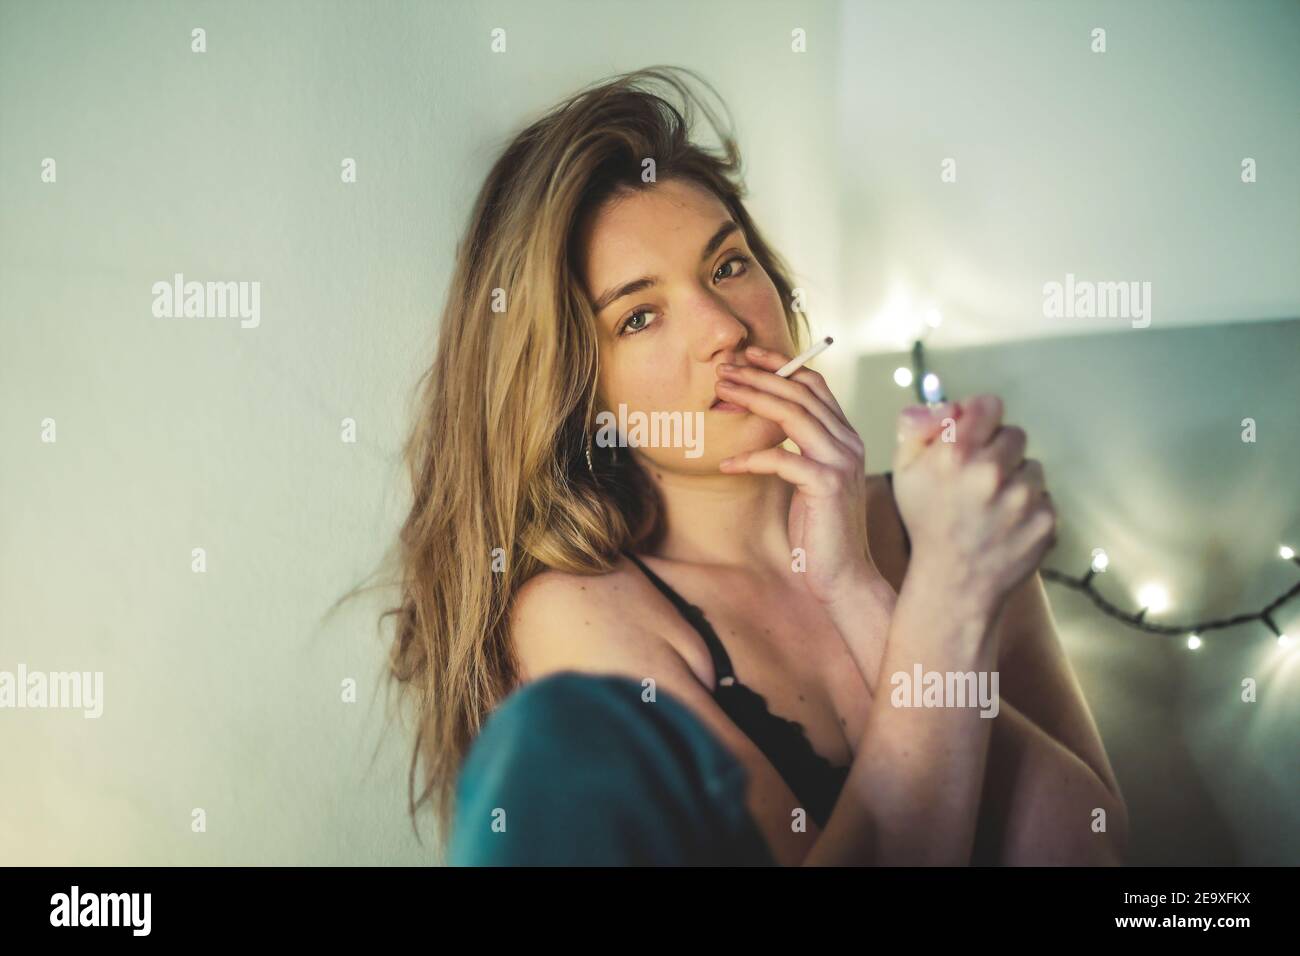 Shallow focus of a woman lighting a cigarette on her bed with light garlands on the background Stock Photo